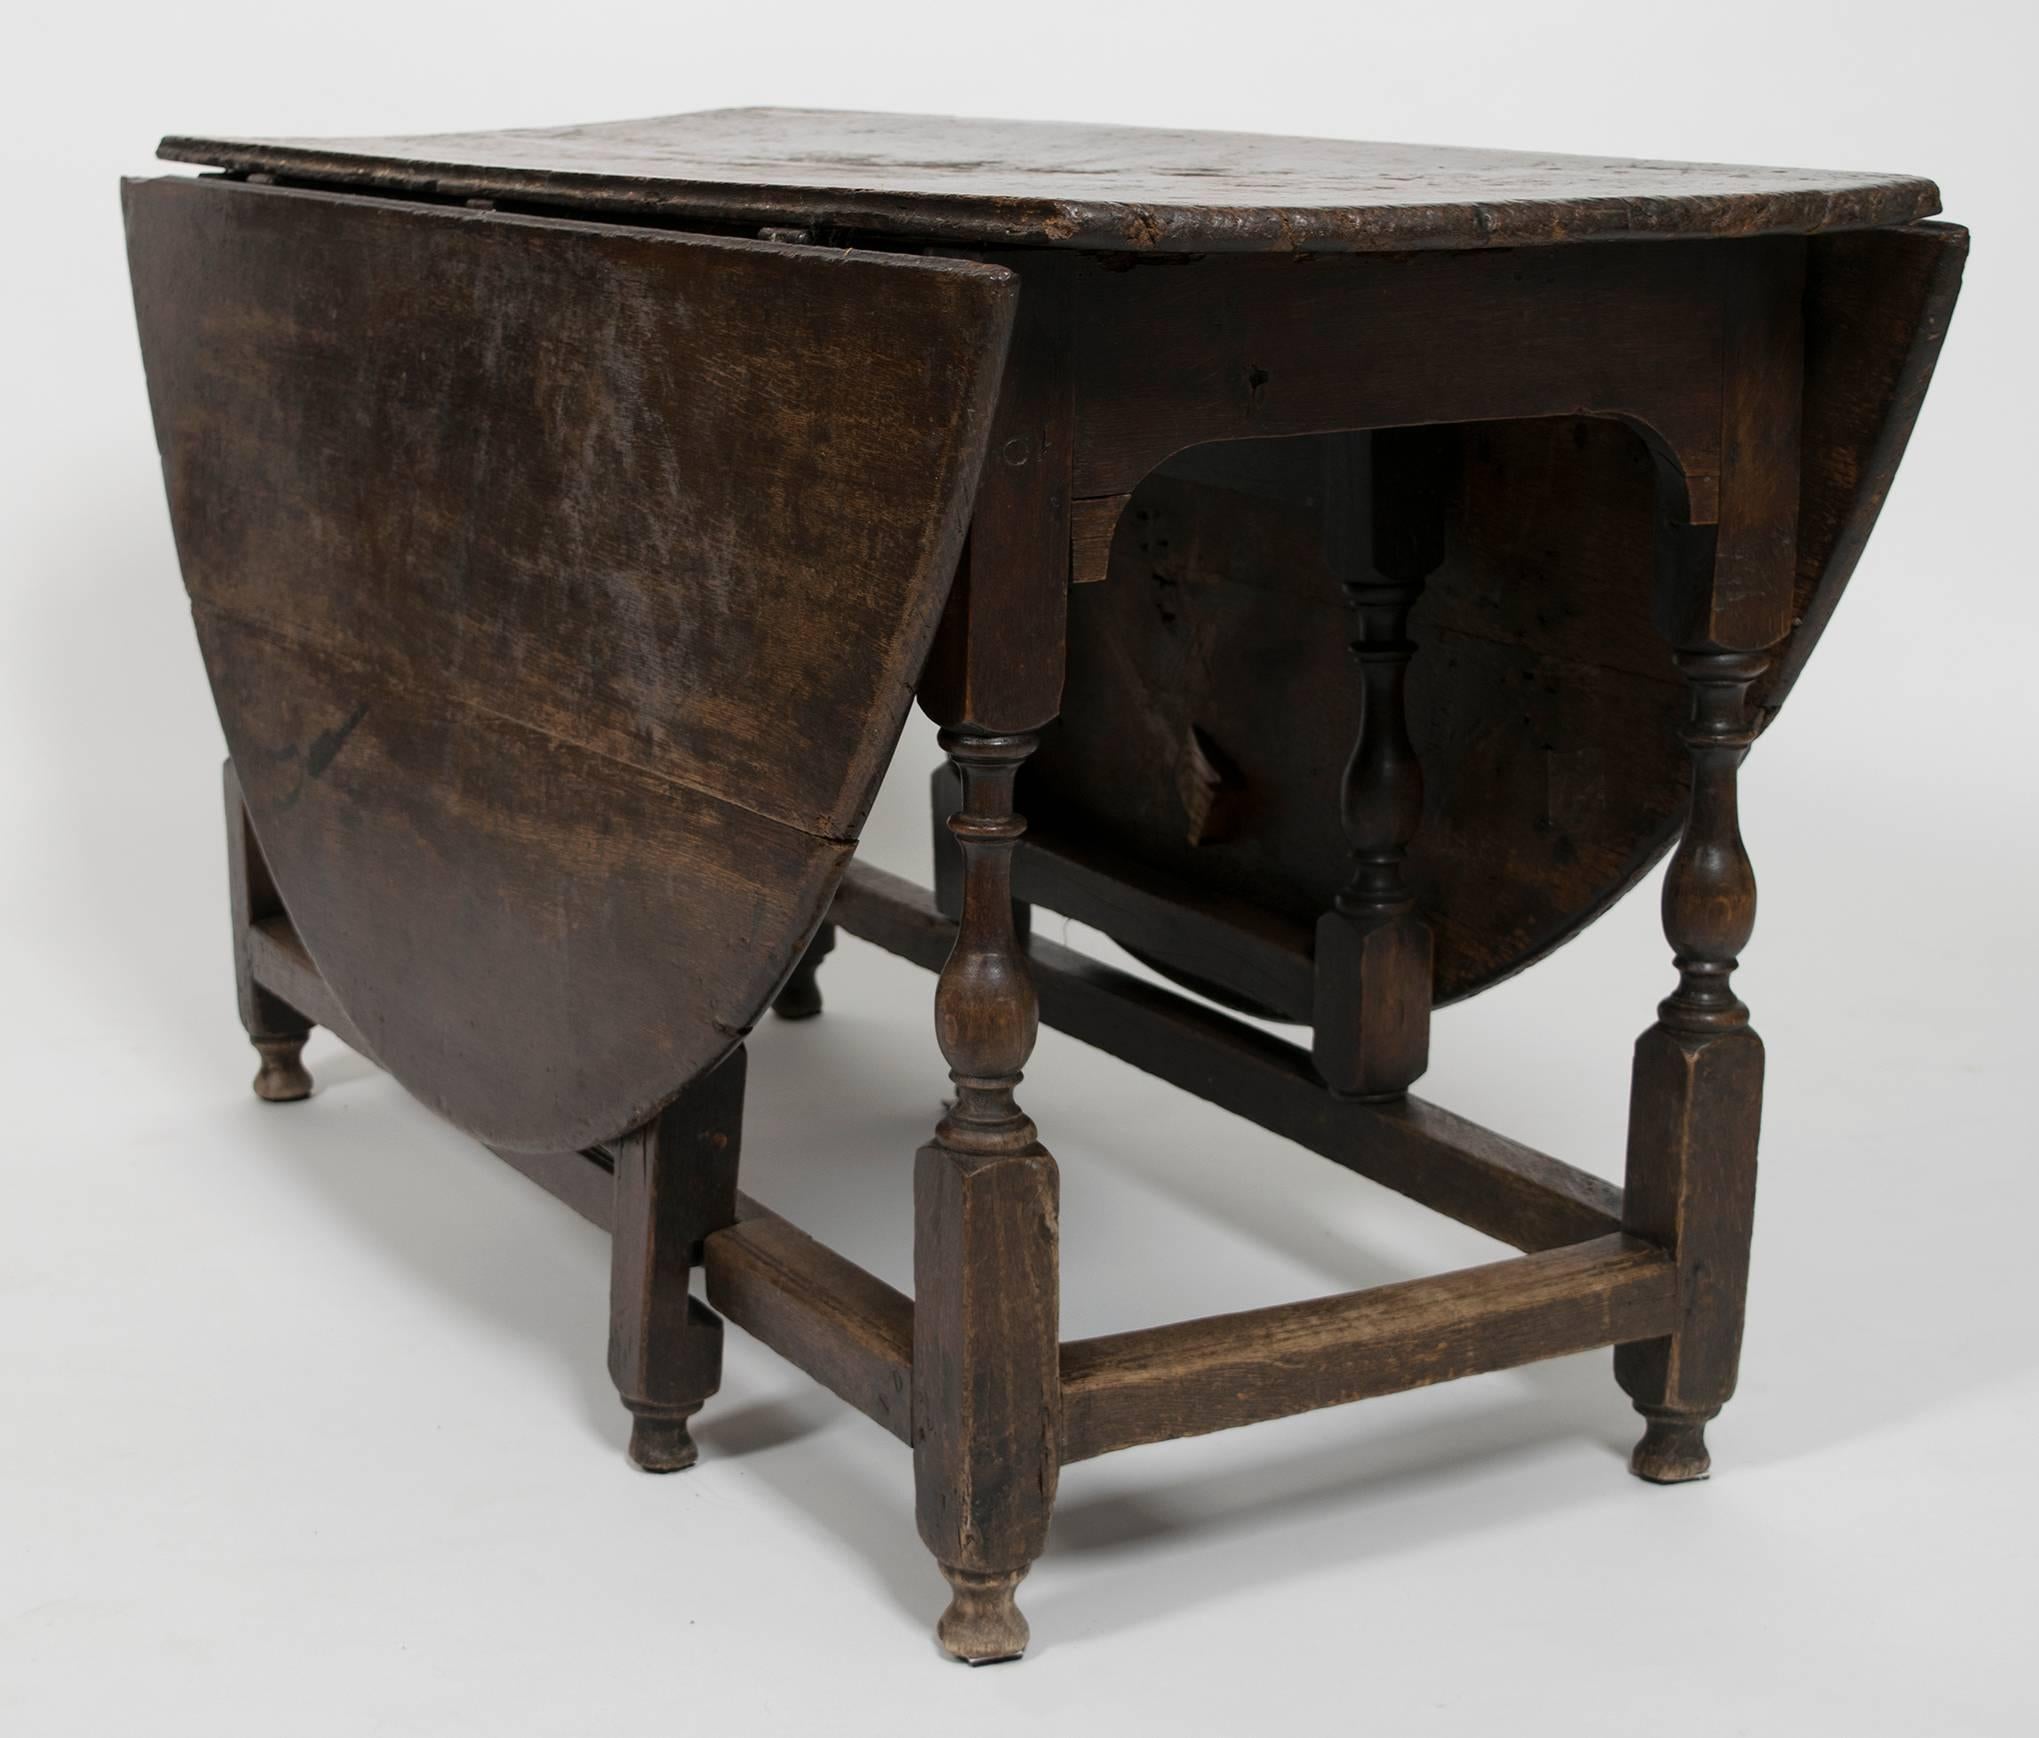 Early Georgian drop-leaf oak table with turned legs, circa 1750. Dimensions listed are for the table fully open. With leaves dropped, the table measures 19 1/2" wide.